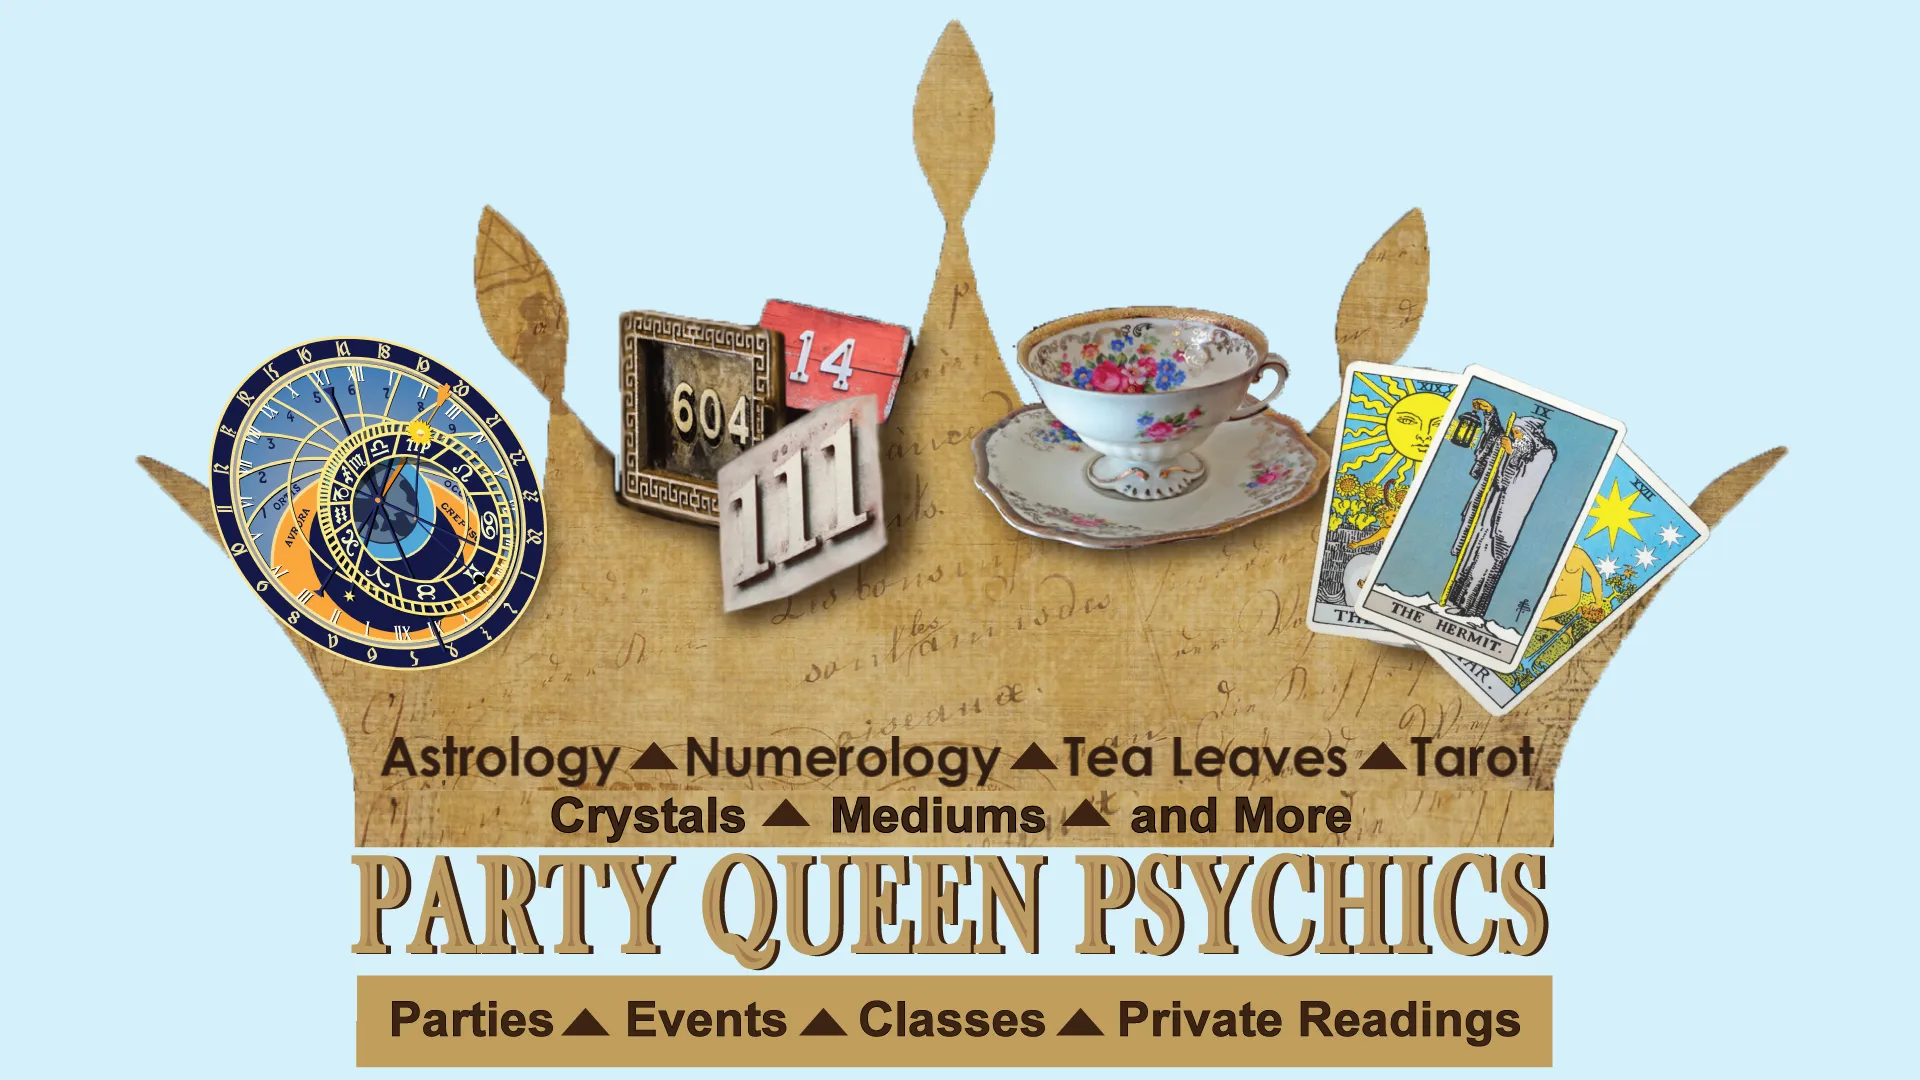 Party Queen Psychics, Readers for Events